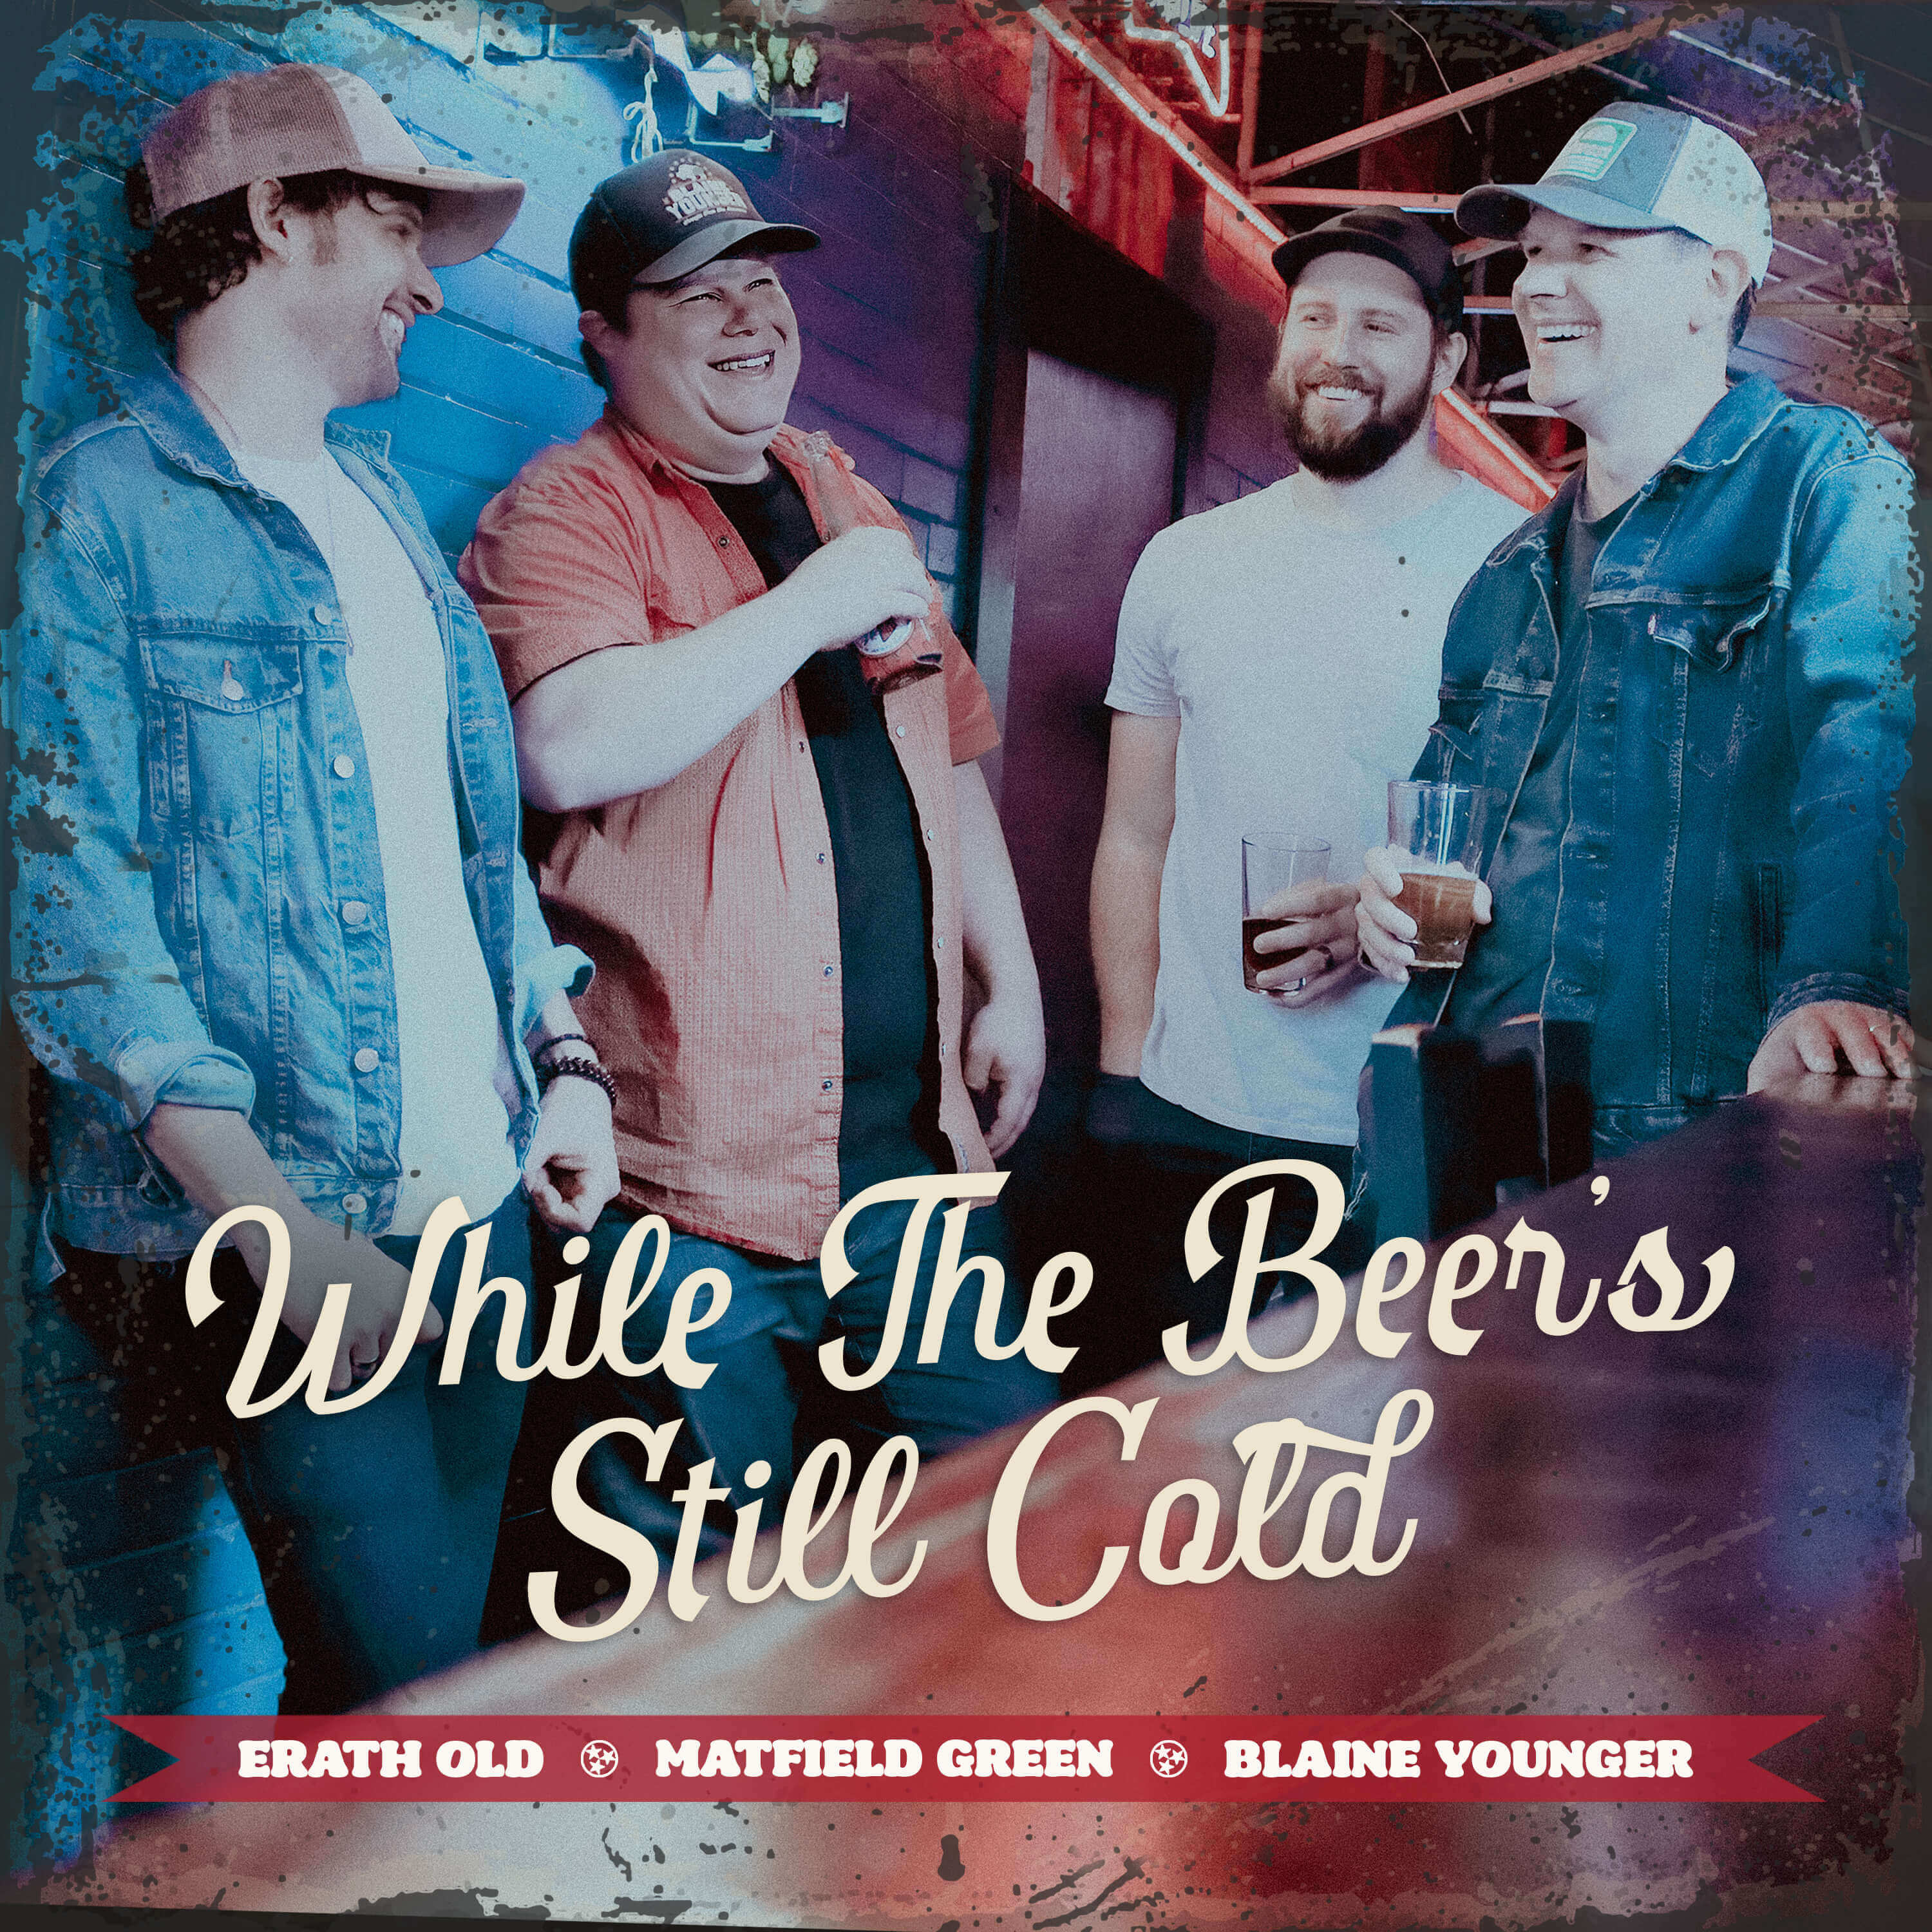 While The Beer's Still Cold by Erath Old, Blaine Younger, Matfield Green single cover art